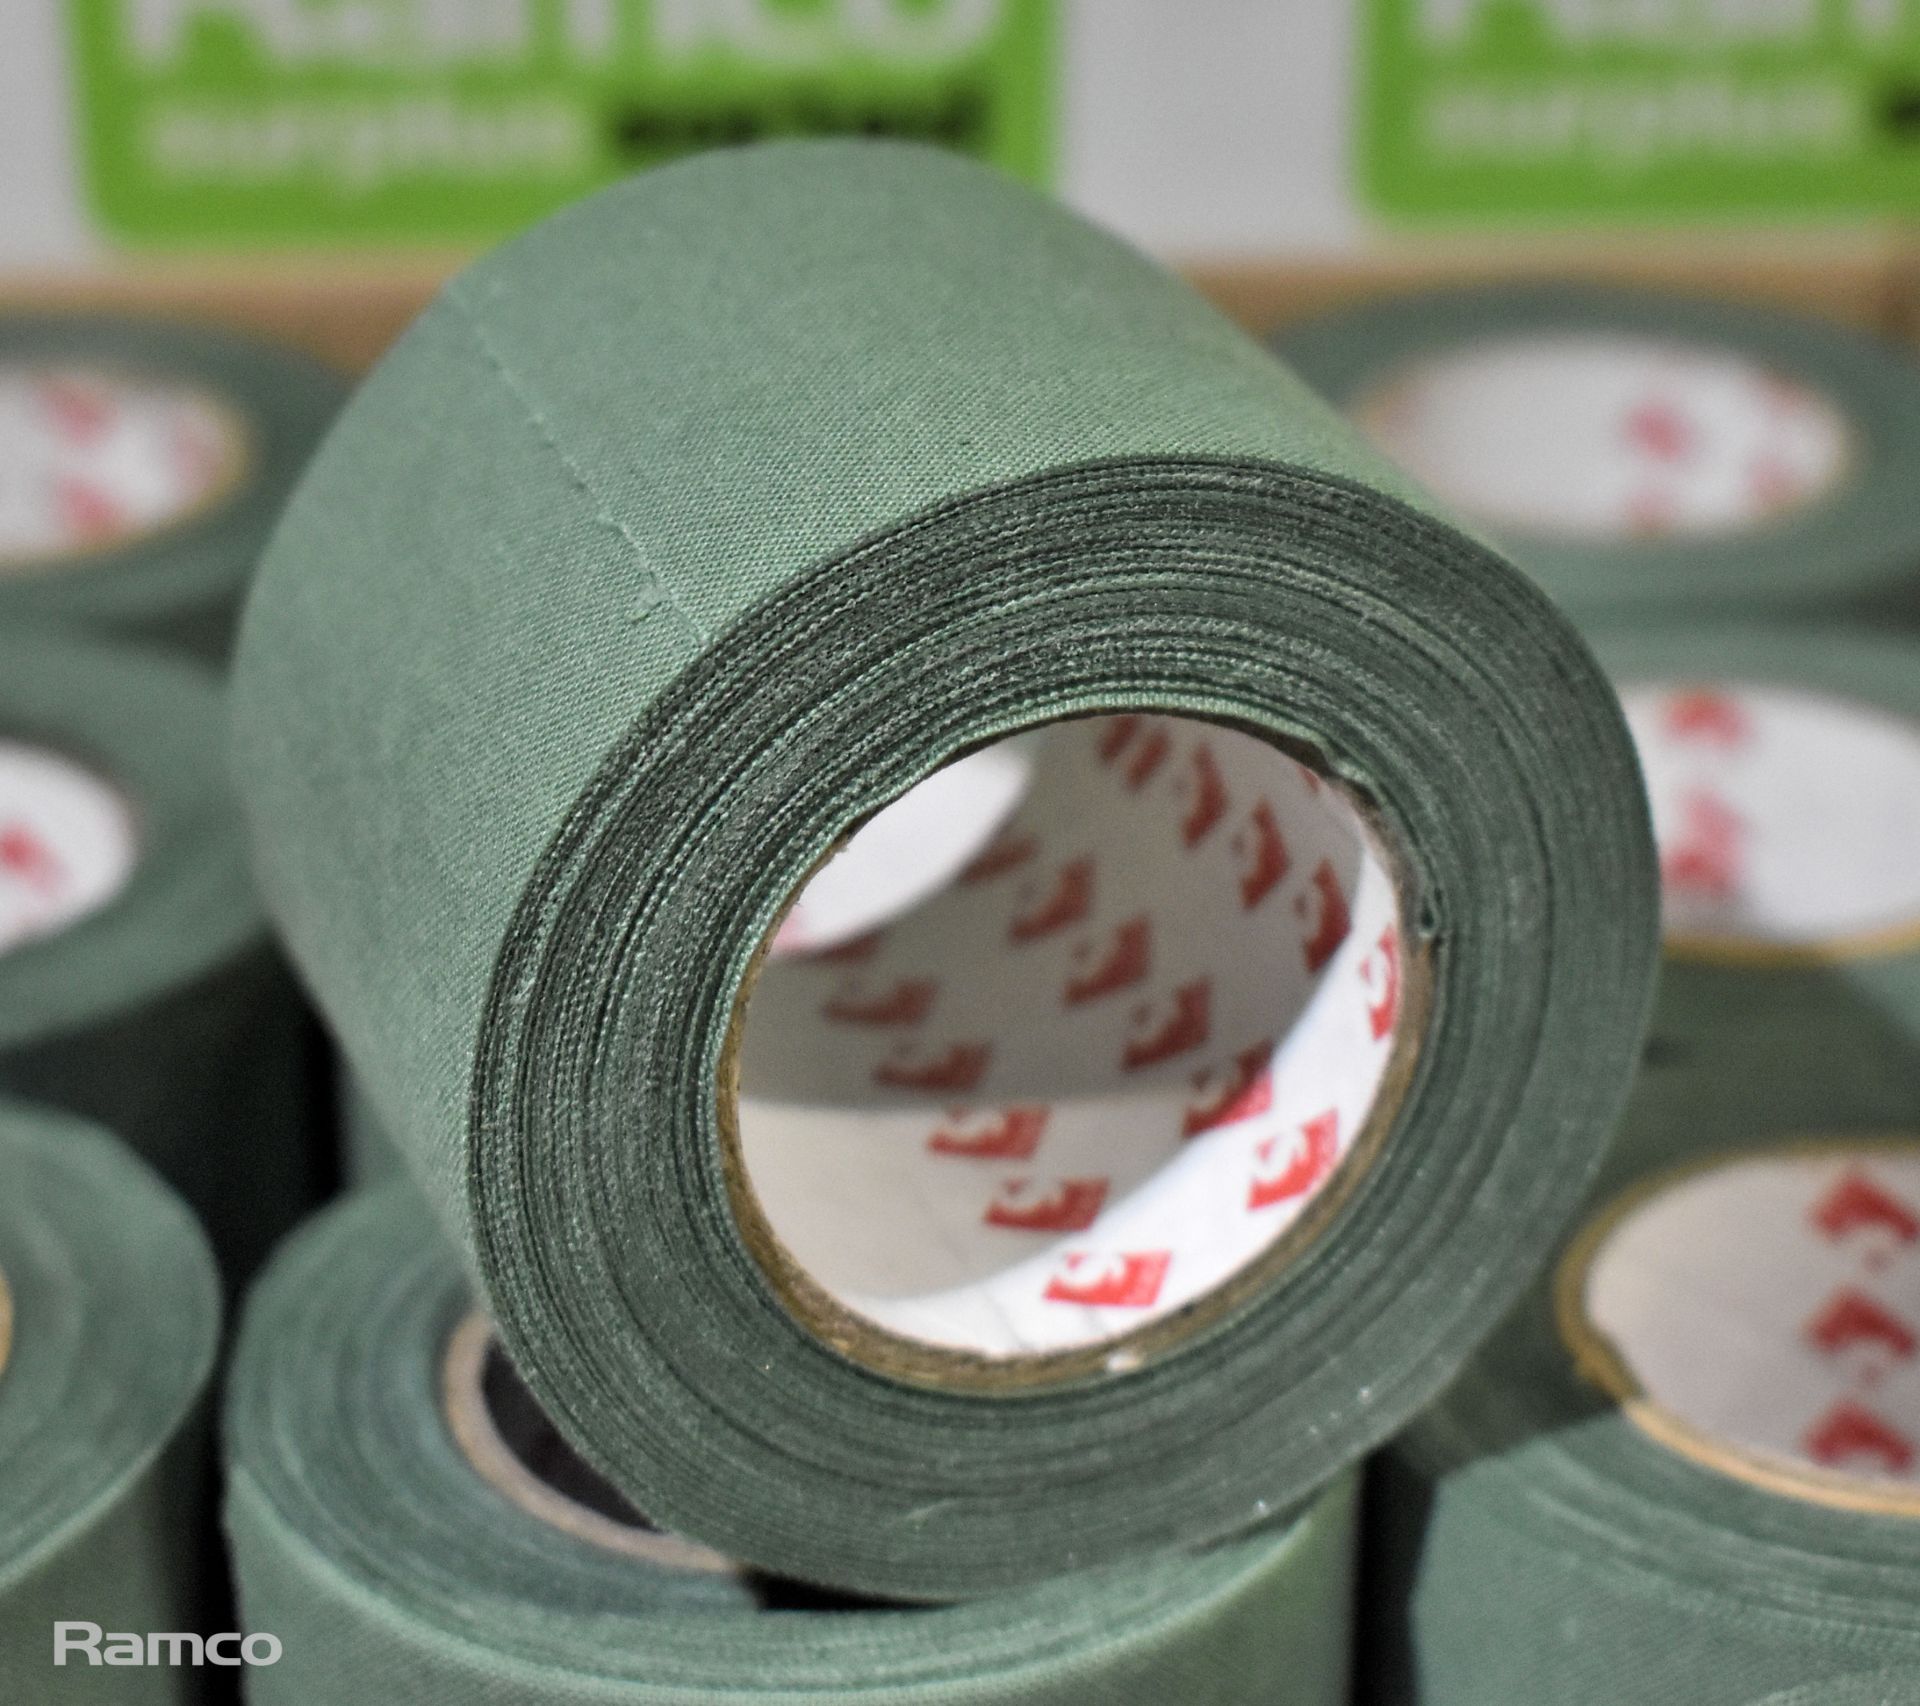 96x rolls of Scapa tape - 50mm x 10m - olive green - Image 3 of 3